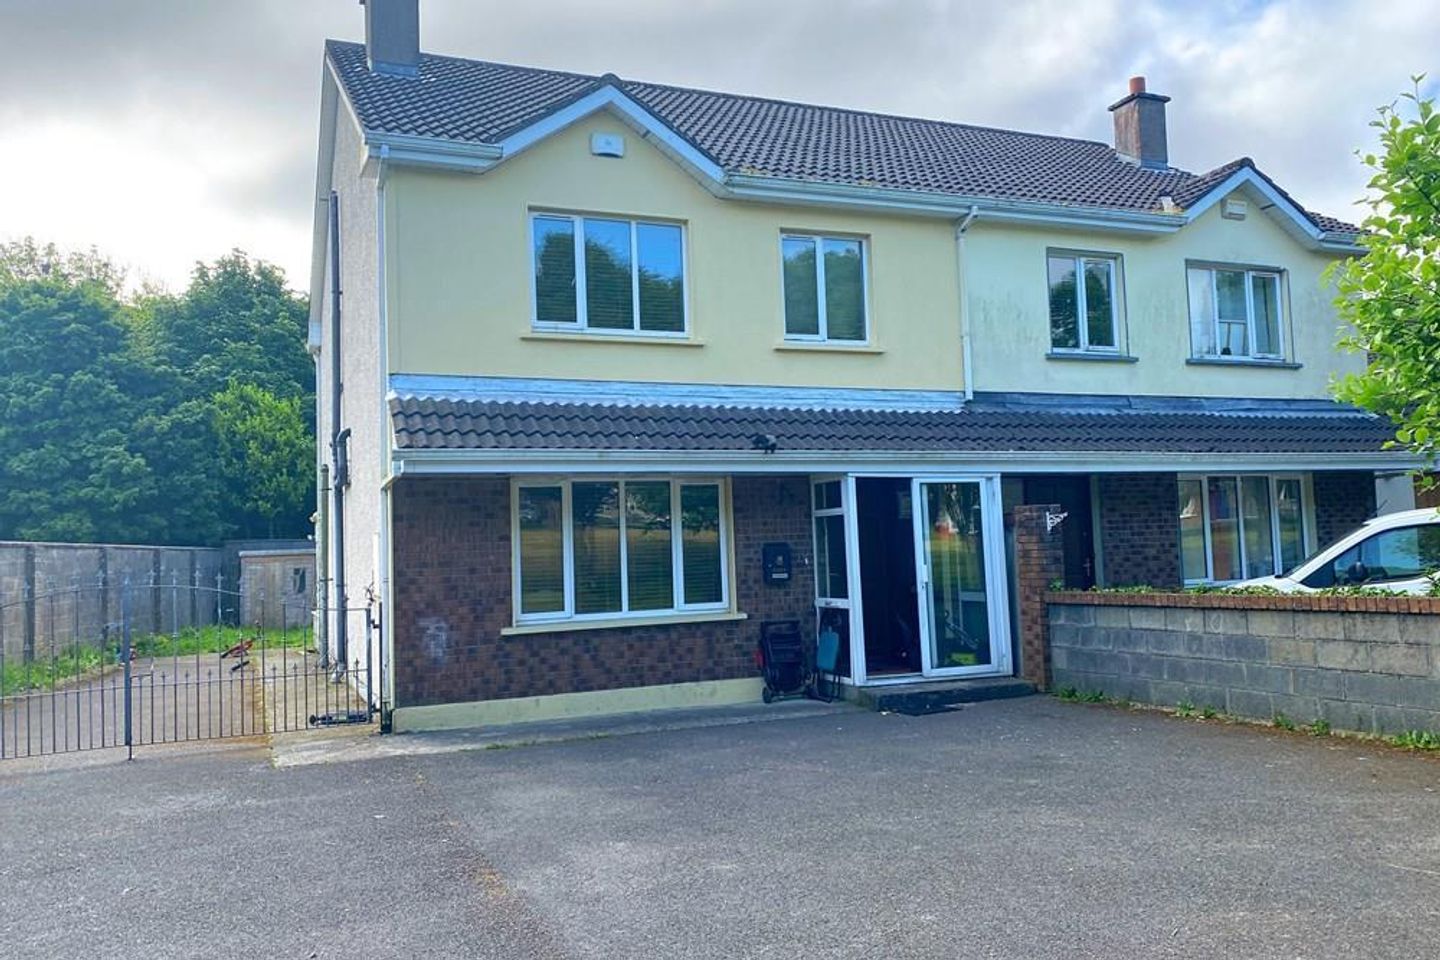 9 Bun Caise, Bishop O'Donnell Rd Galway, Rahoon, Co. Galway